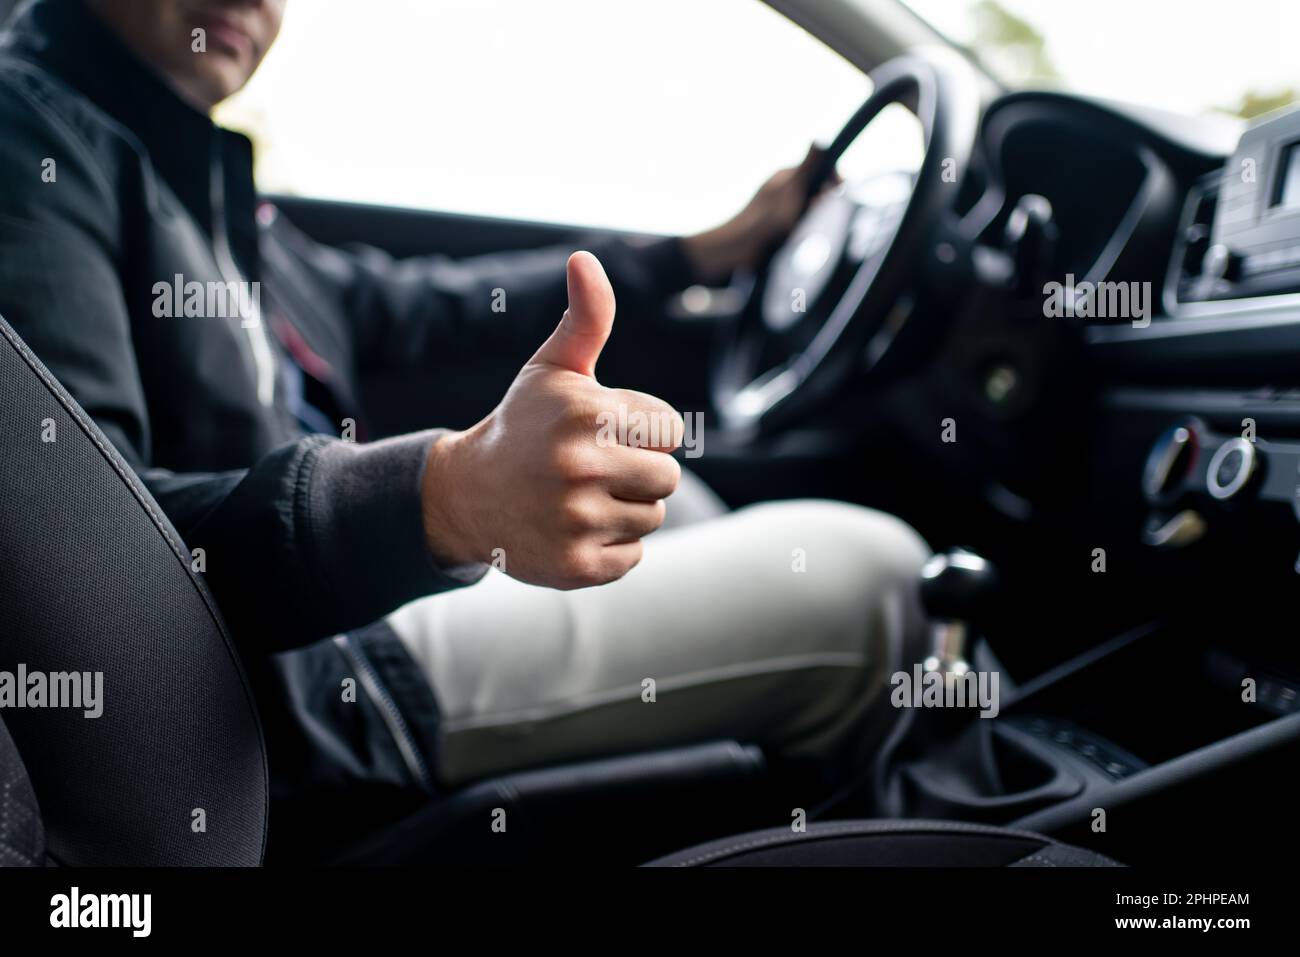 Happy driver in car, thumbs up. Man driving. Smiling positive new vehicle buyer and owner. Good customer service in taxi, dealership, insurance. Stock Photo